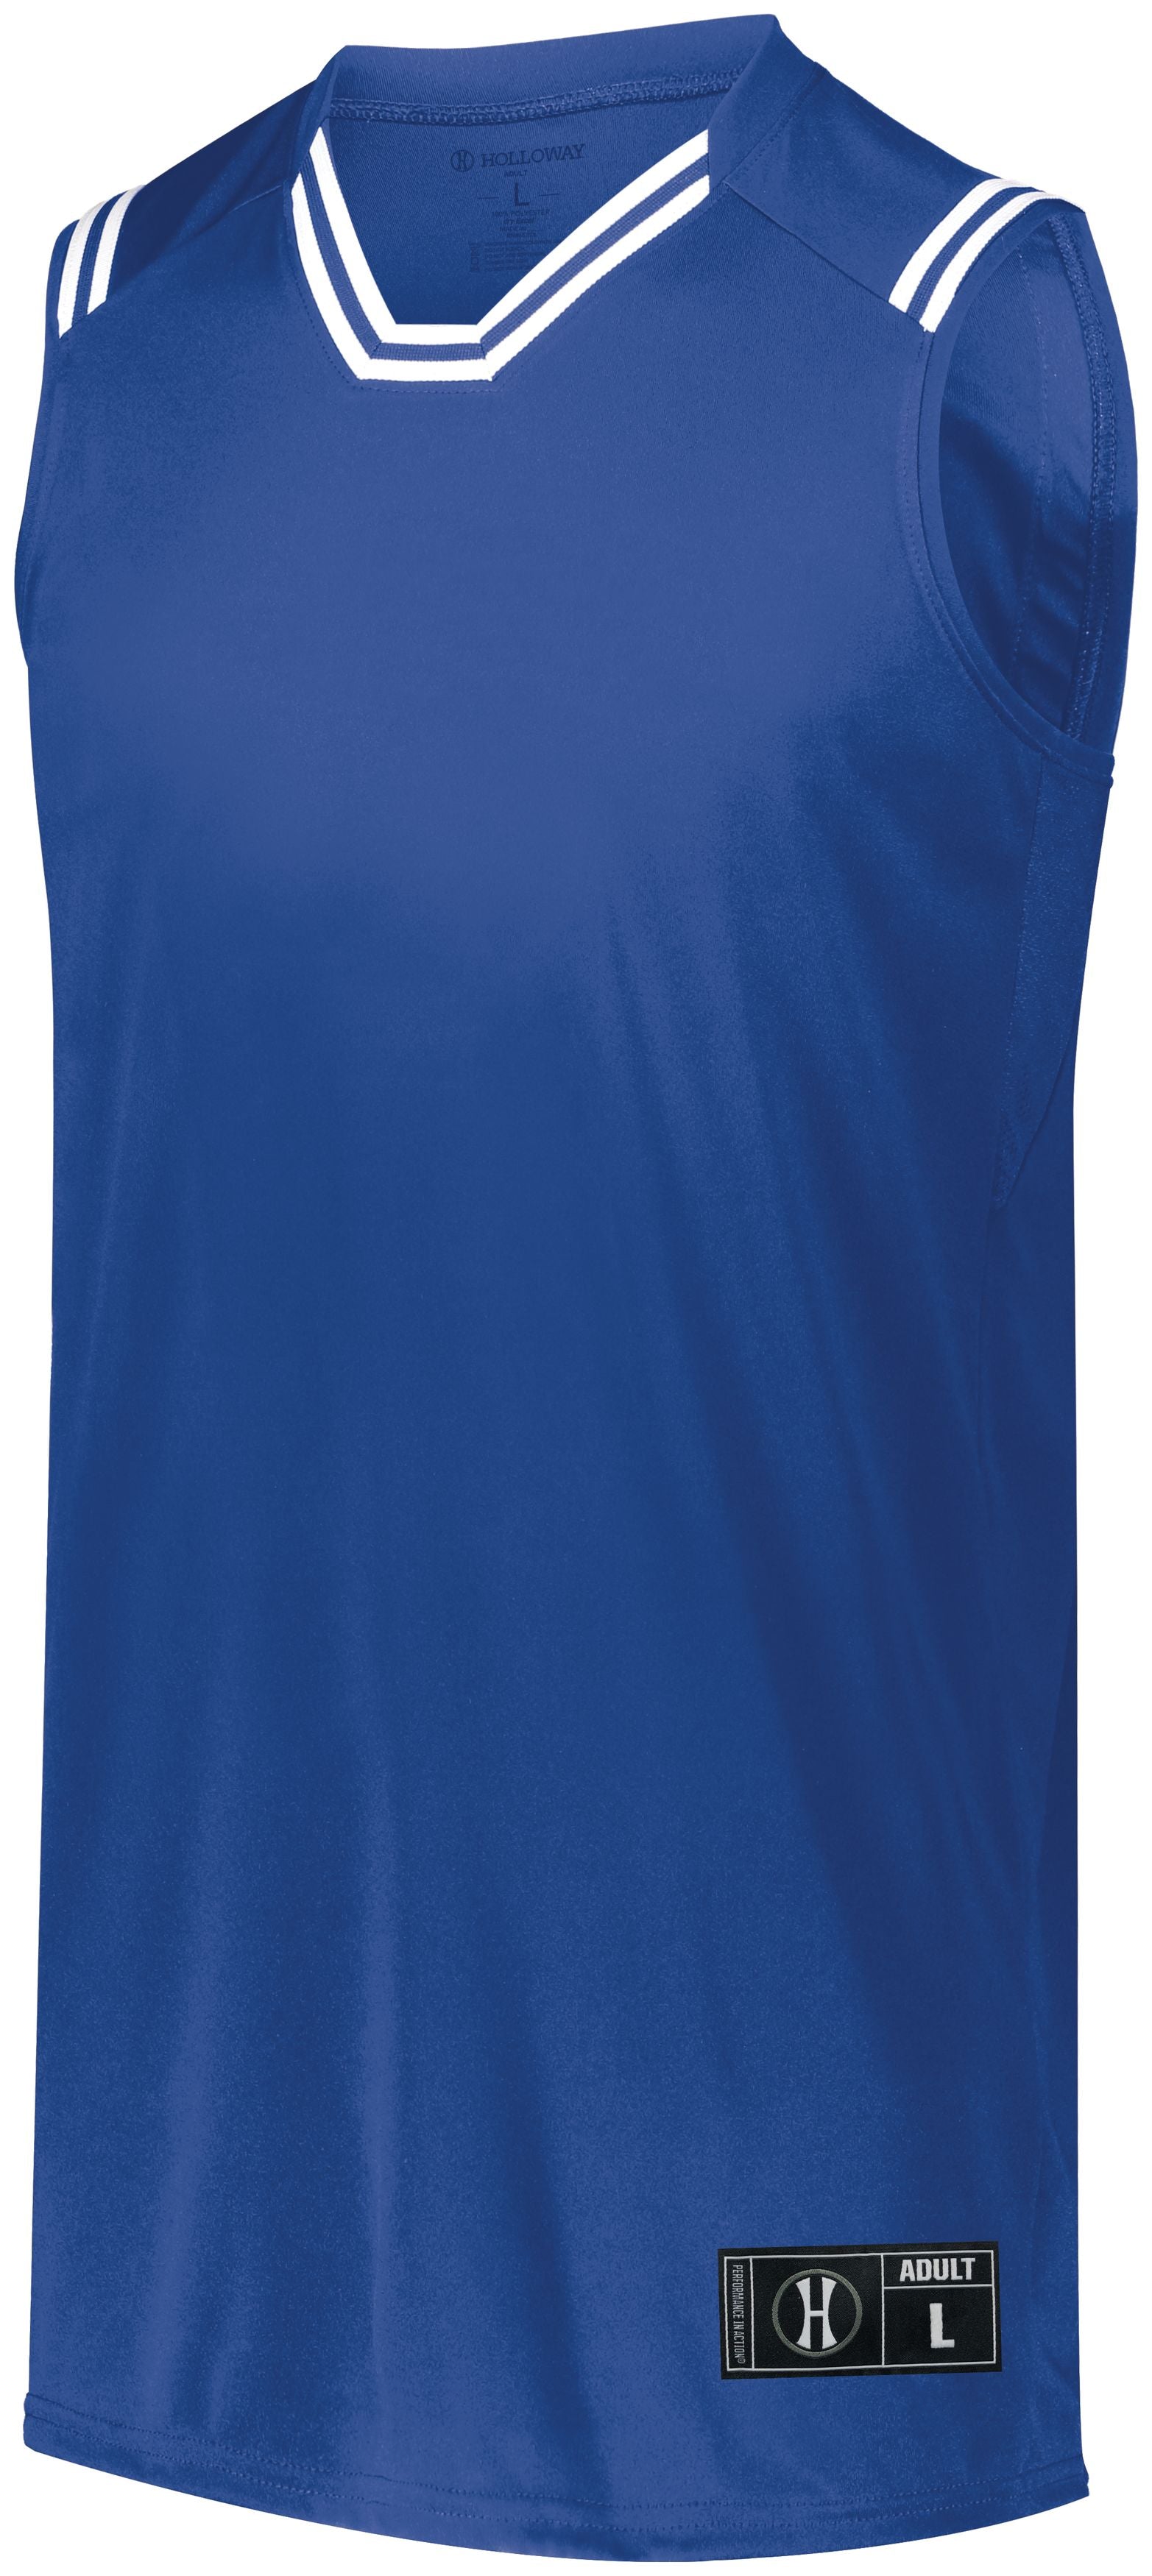 Holloway Retro Basketball Jersey in Royal/White  -Part of the Adult, Adult-Jersey, Basketball, Holloway, Shirts, All-Sports, All-Sports-1 product lines at KanaleyCreations.com